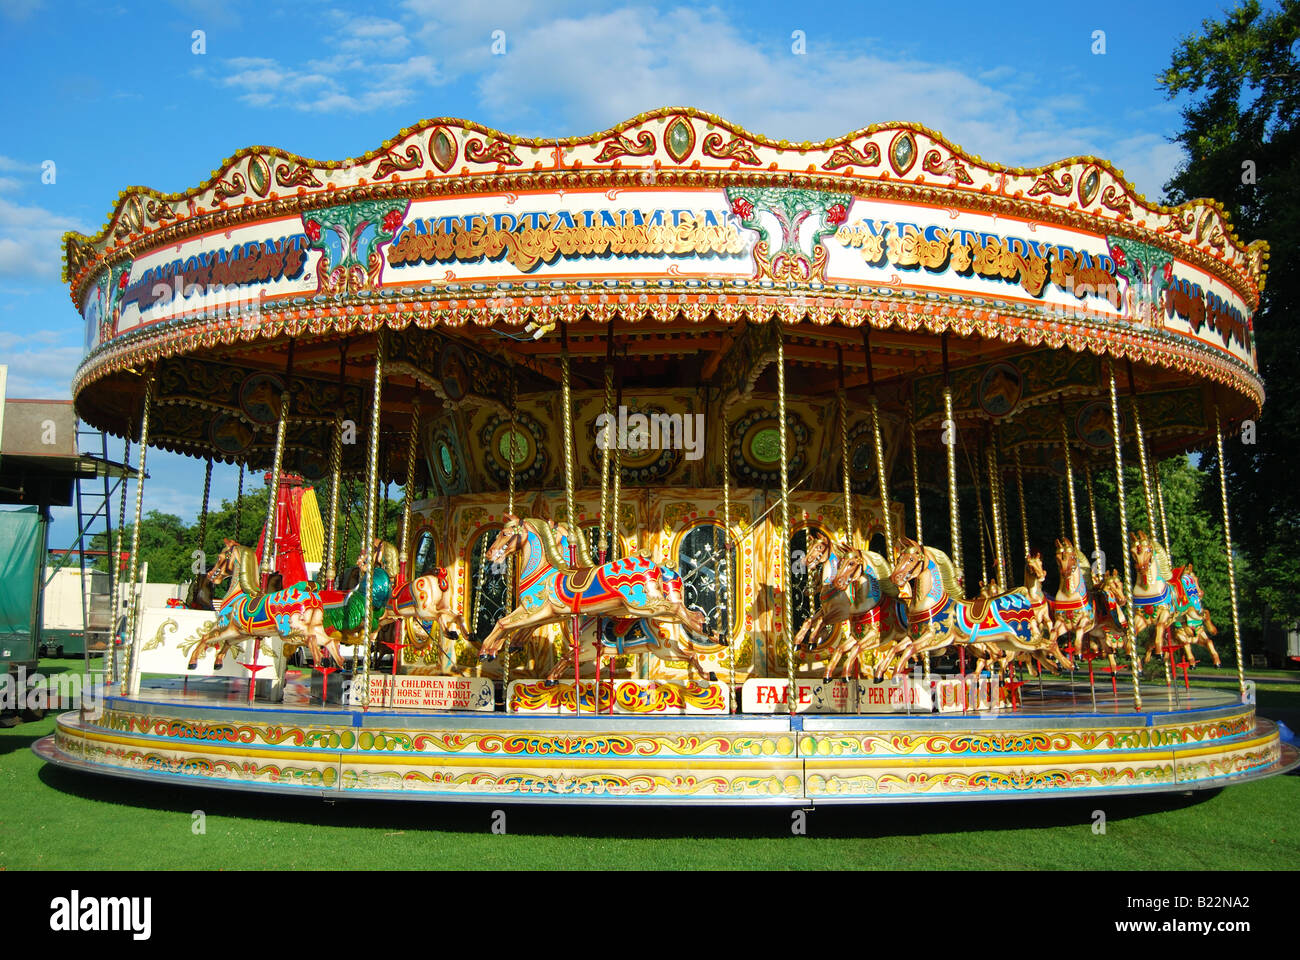 Wooden horses on carousel, The Time Gardens, Bedford, Bedfordshire, England, United Kingdom Stock Photo